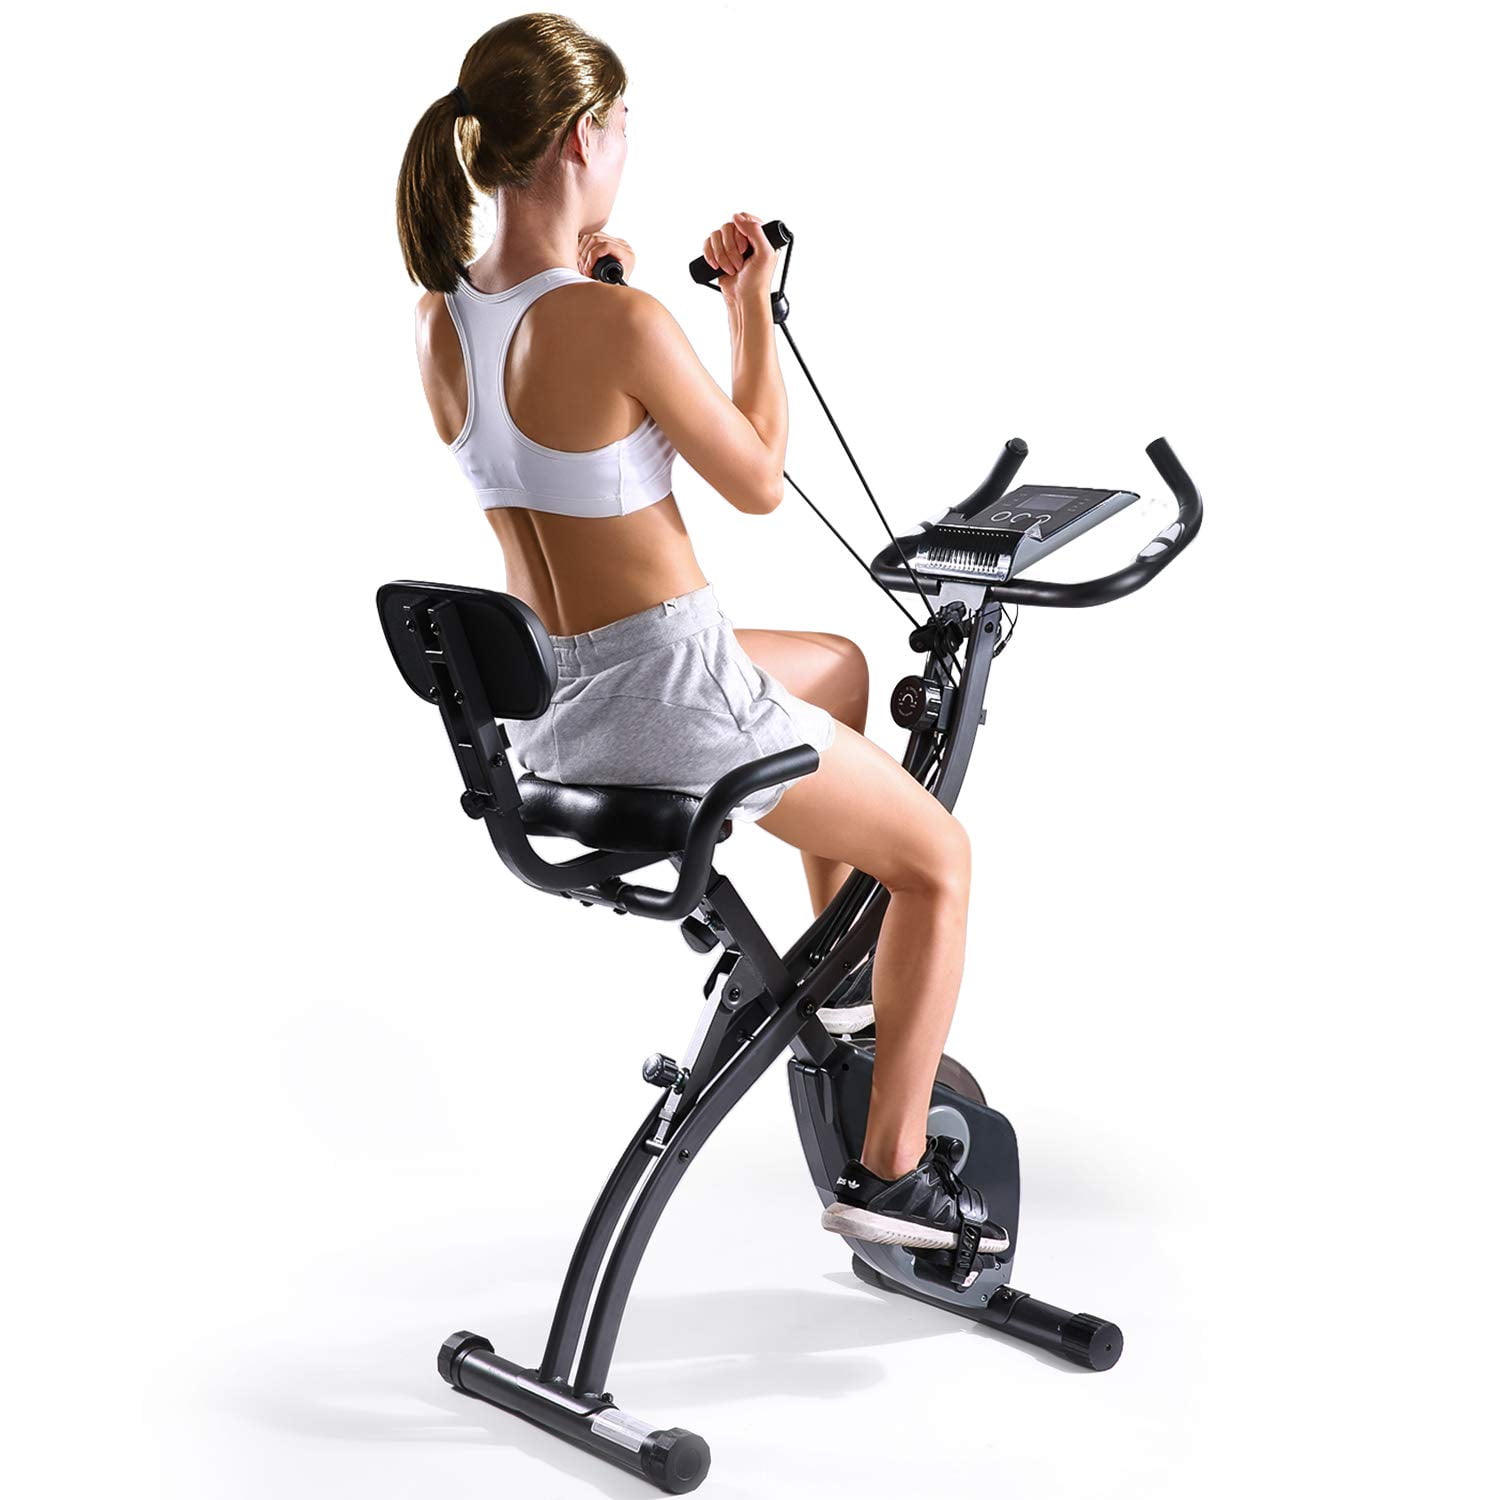 Folding Magnetic Bands Exercise Bike Stationary Upright Indoor Cycling Workout 